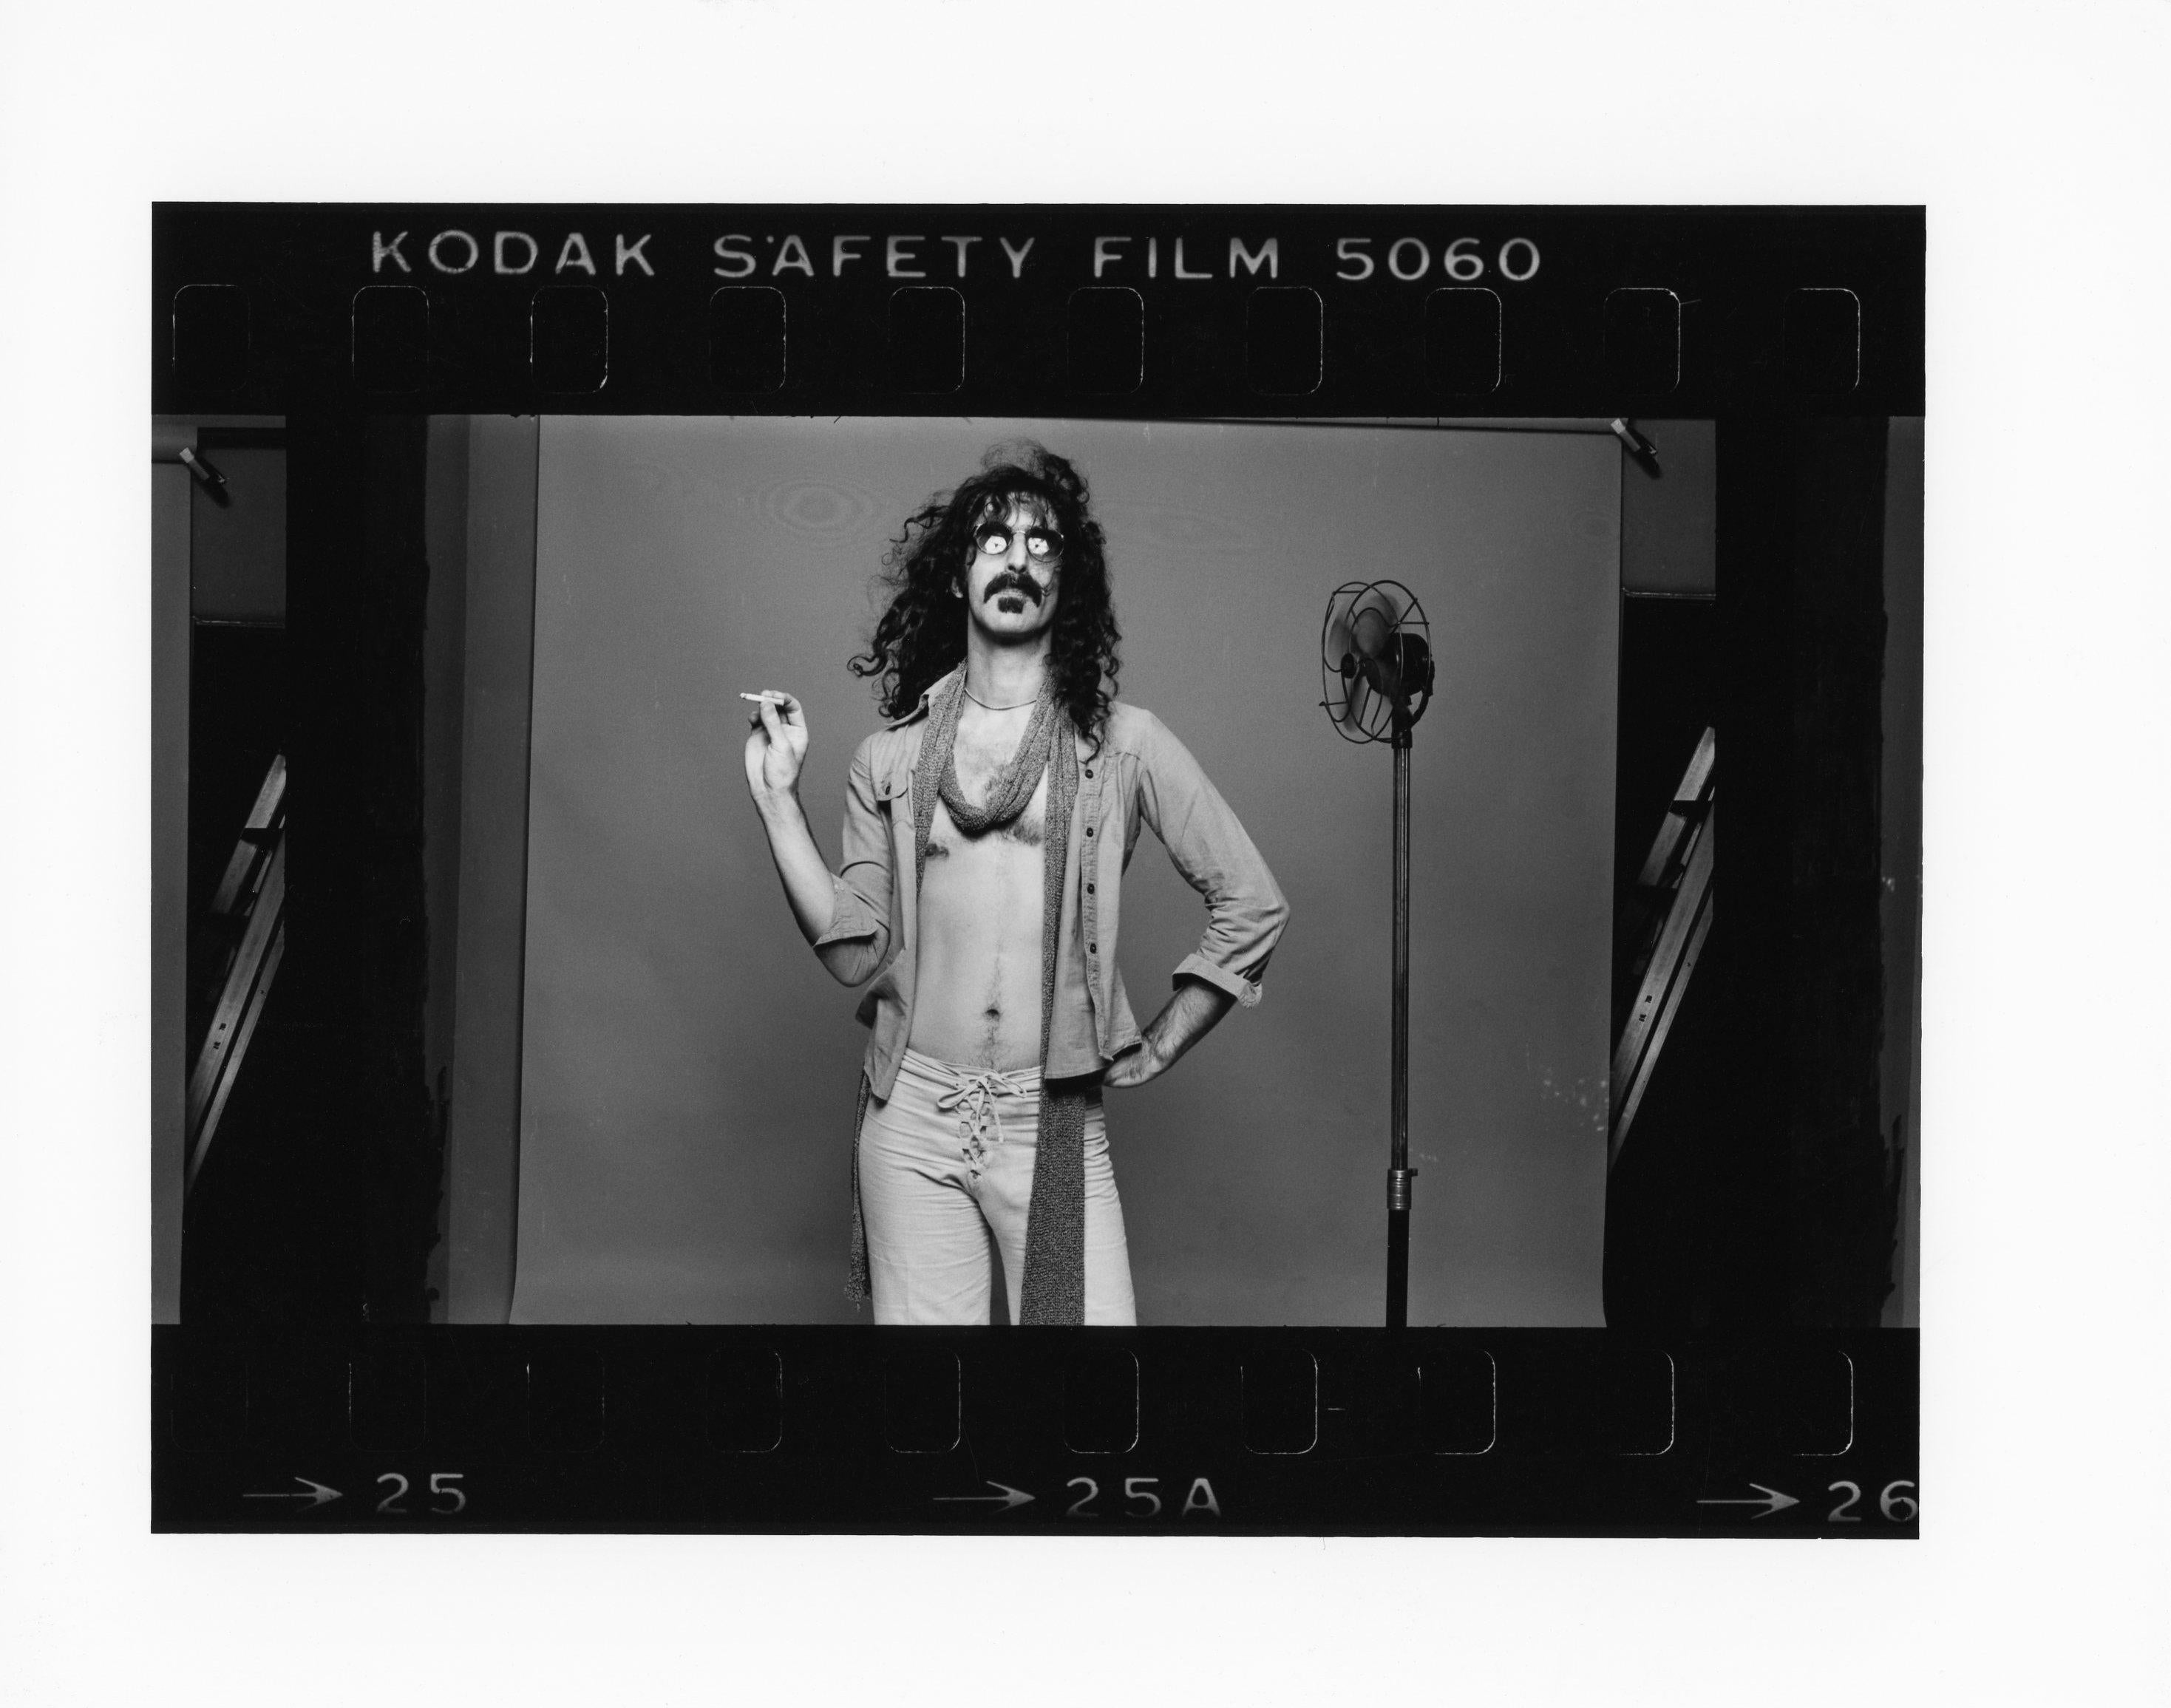 Original vintage 8x10” work print from Norman Seeff of Frank Zappa. Hand printed at the time of the photoshoot, signed on the back by Norman Seeff

In excellent condition having been stored flat in a climate controlled room

These Norman Seeff